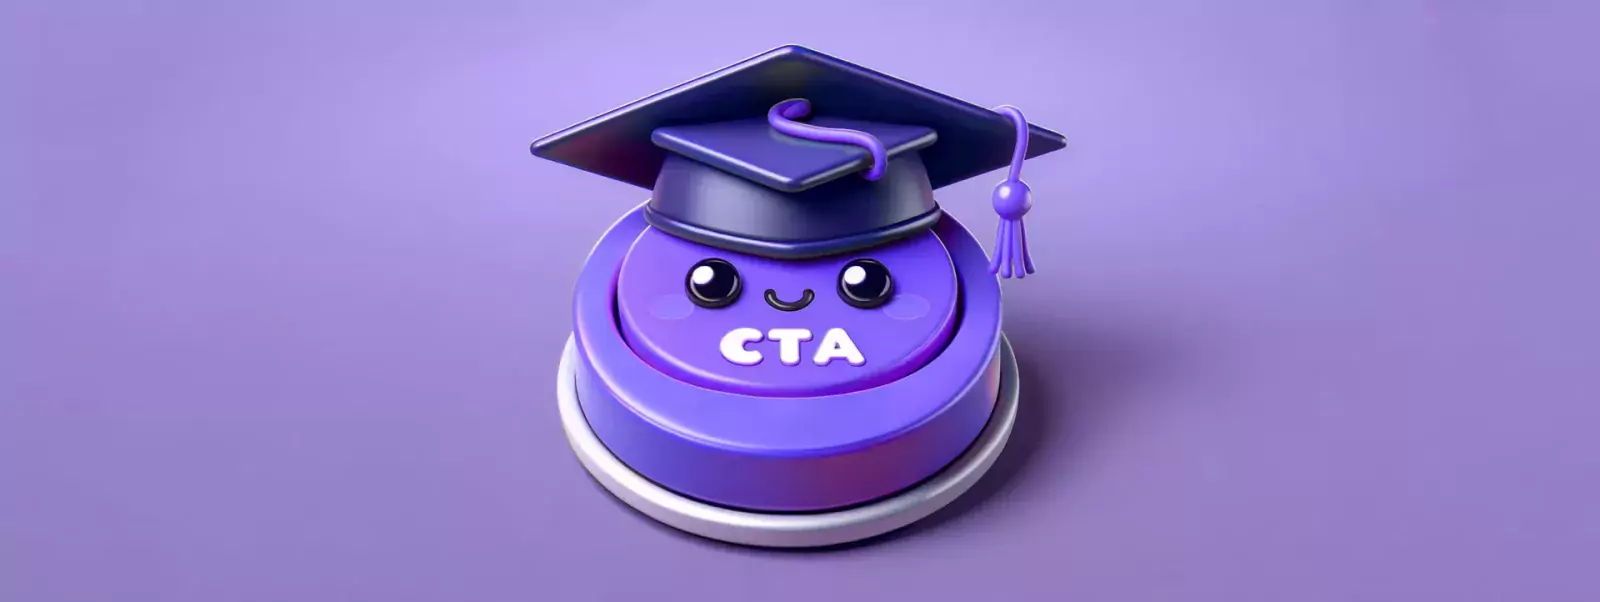 CTA button with a student hat